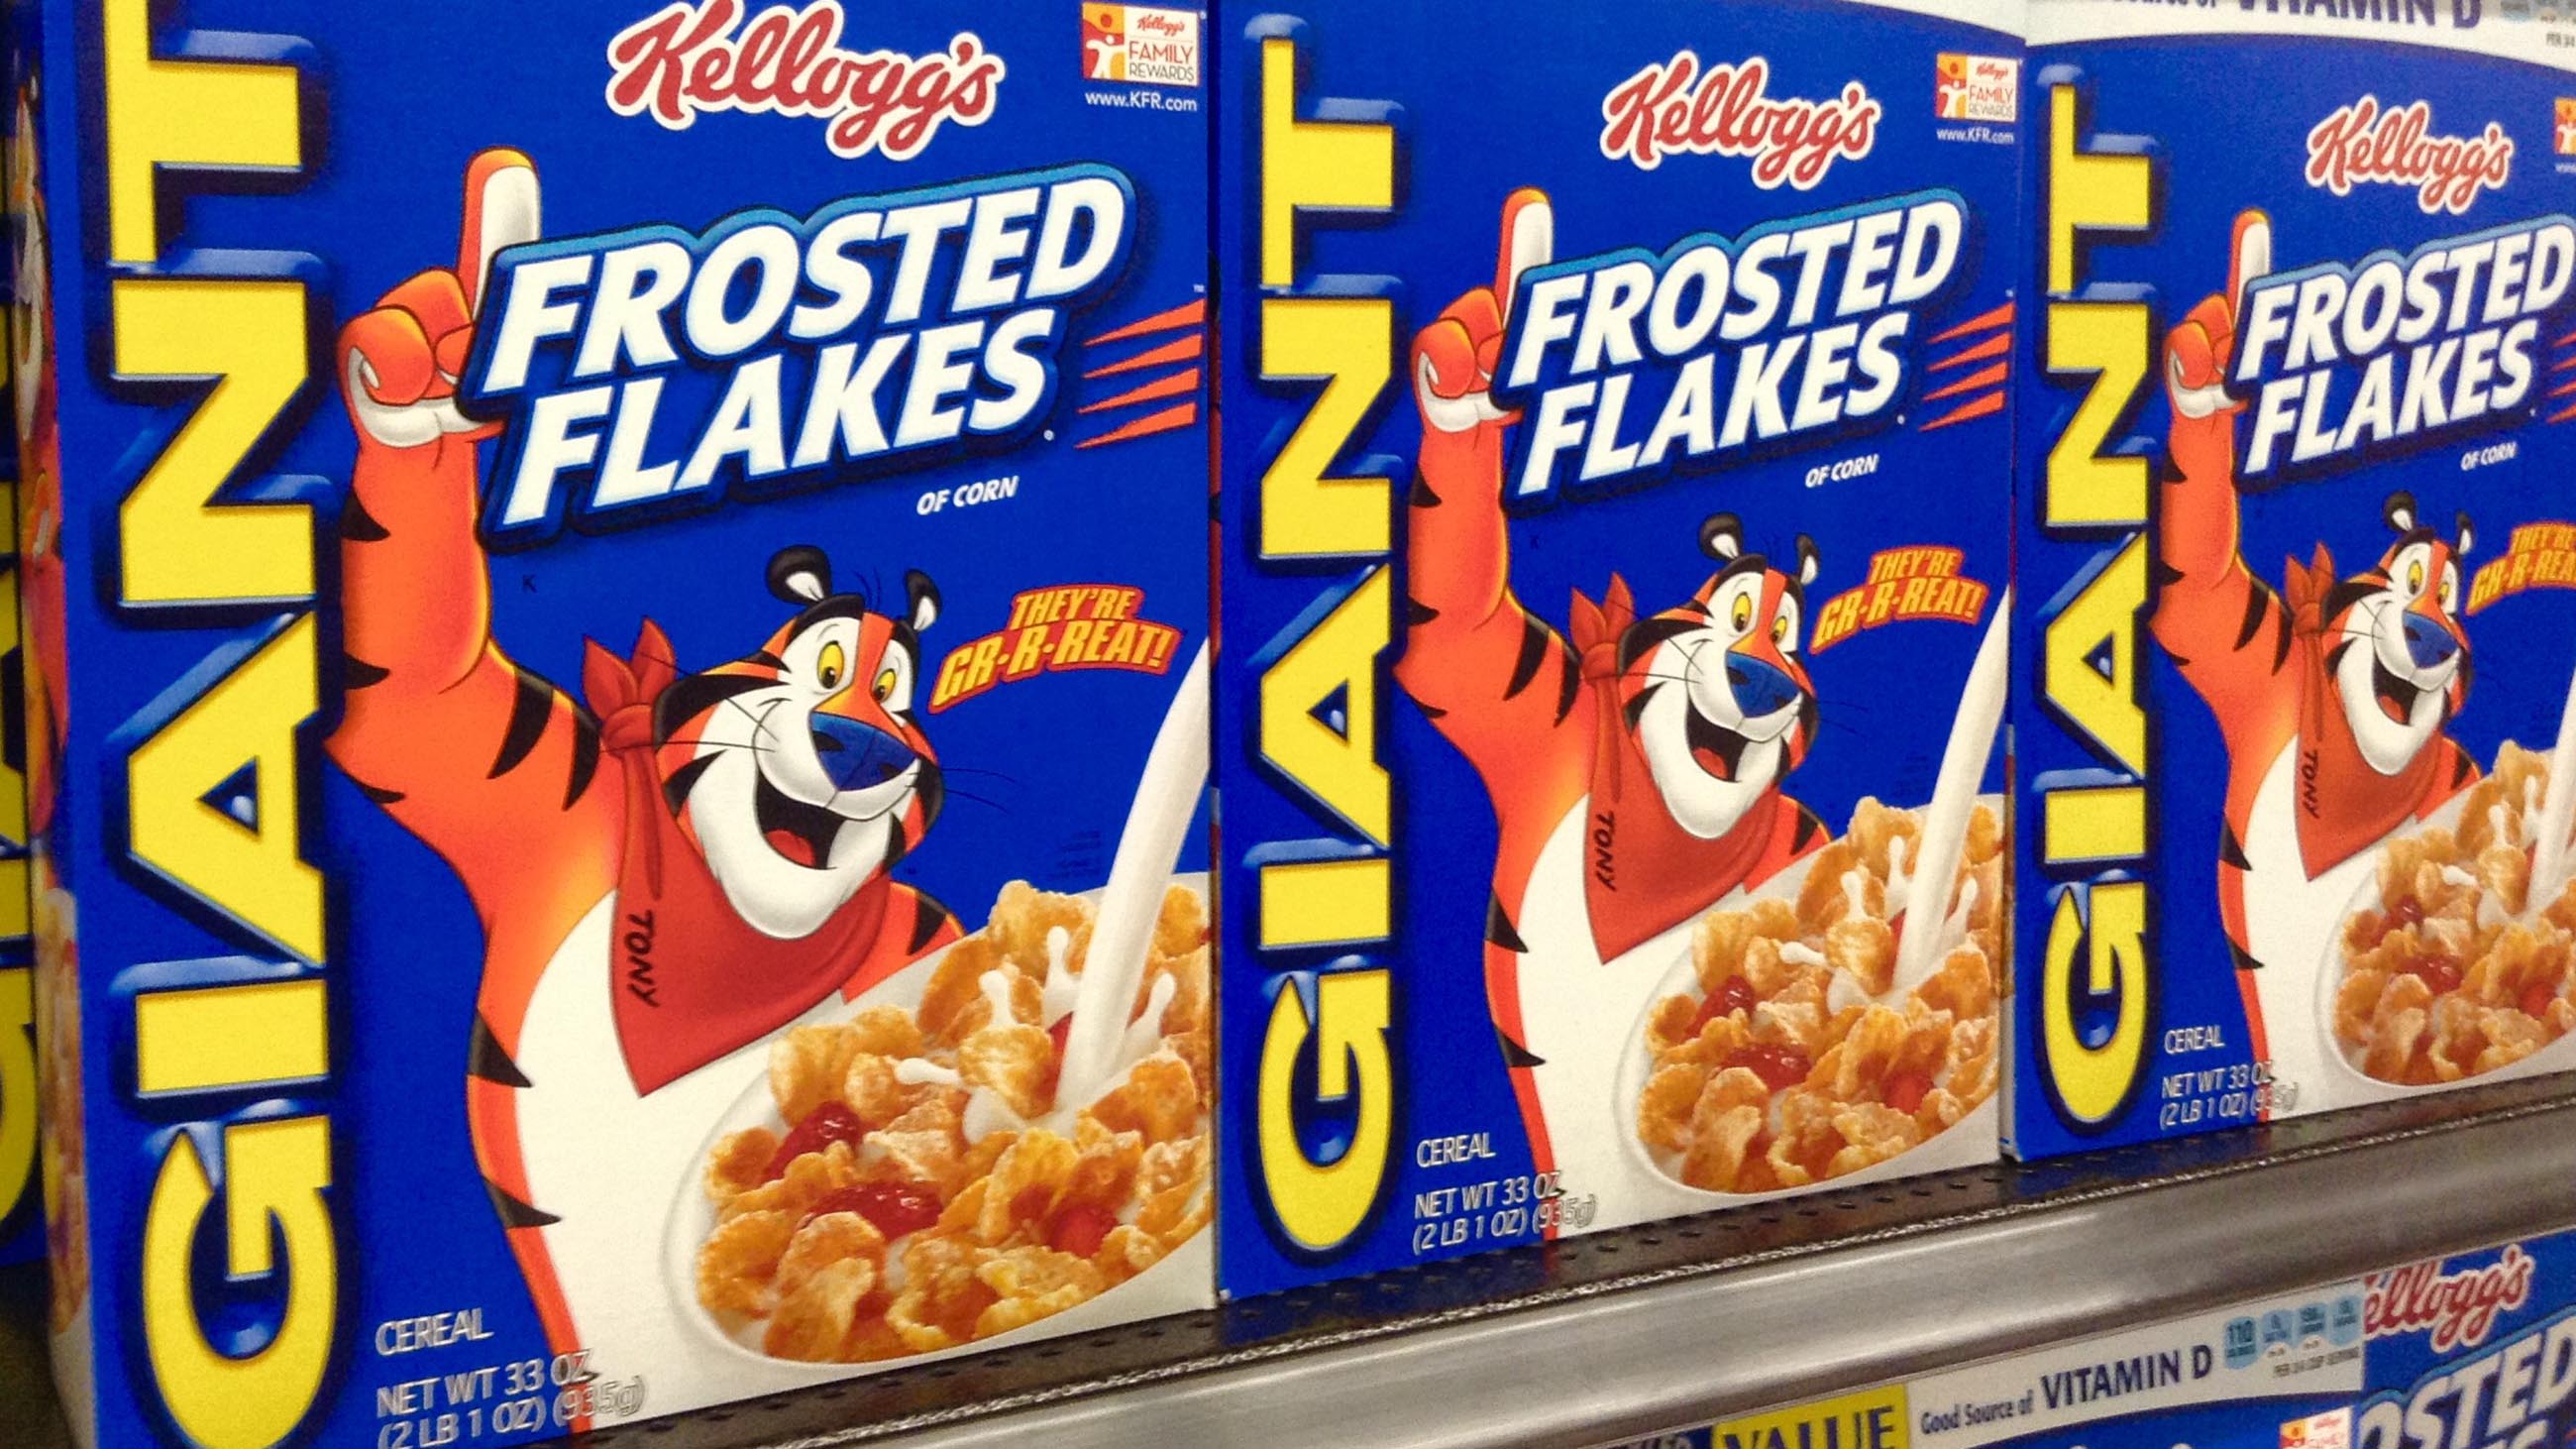 Kellogg's Tony the Tiger is just one example of the sort of eye-catching wildlife used in marketing and branding. Researchers say such  charismatic animals work because of the strong emotional responses they elicit.